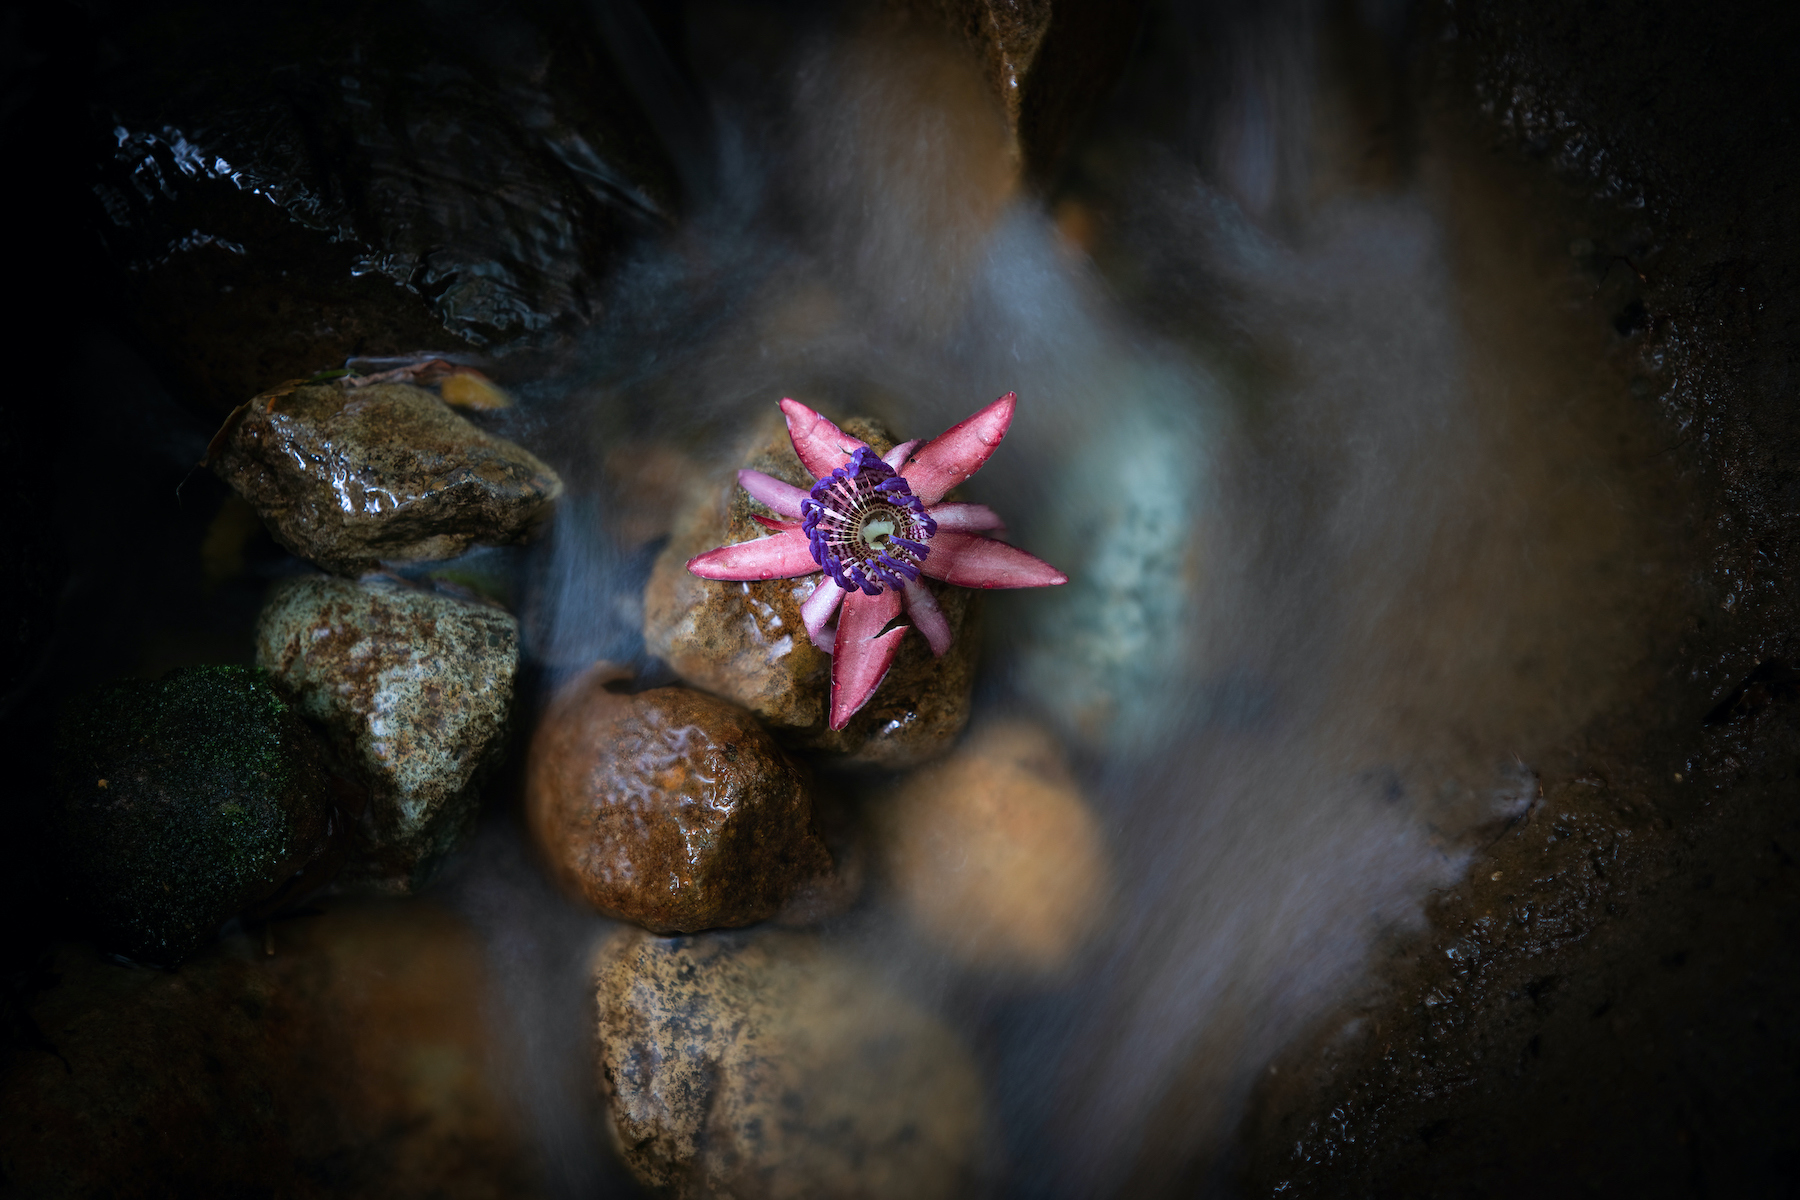 A Purple Tiger Passionflower surrounded by the flowing waters of a forest stream